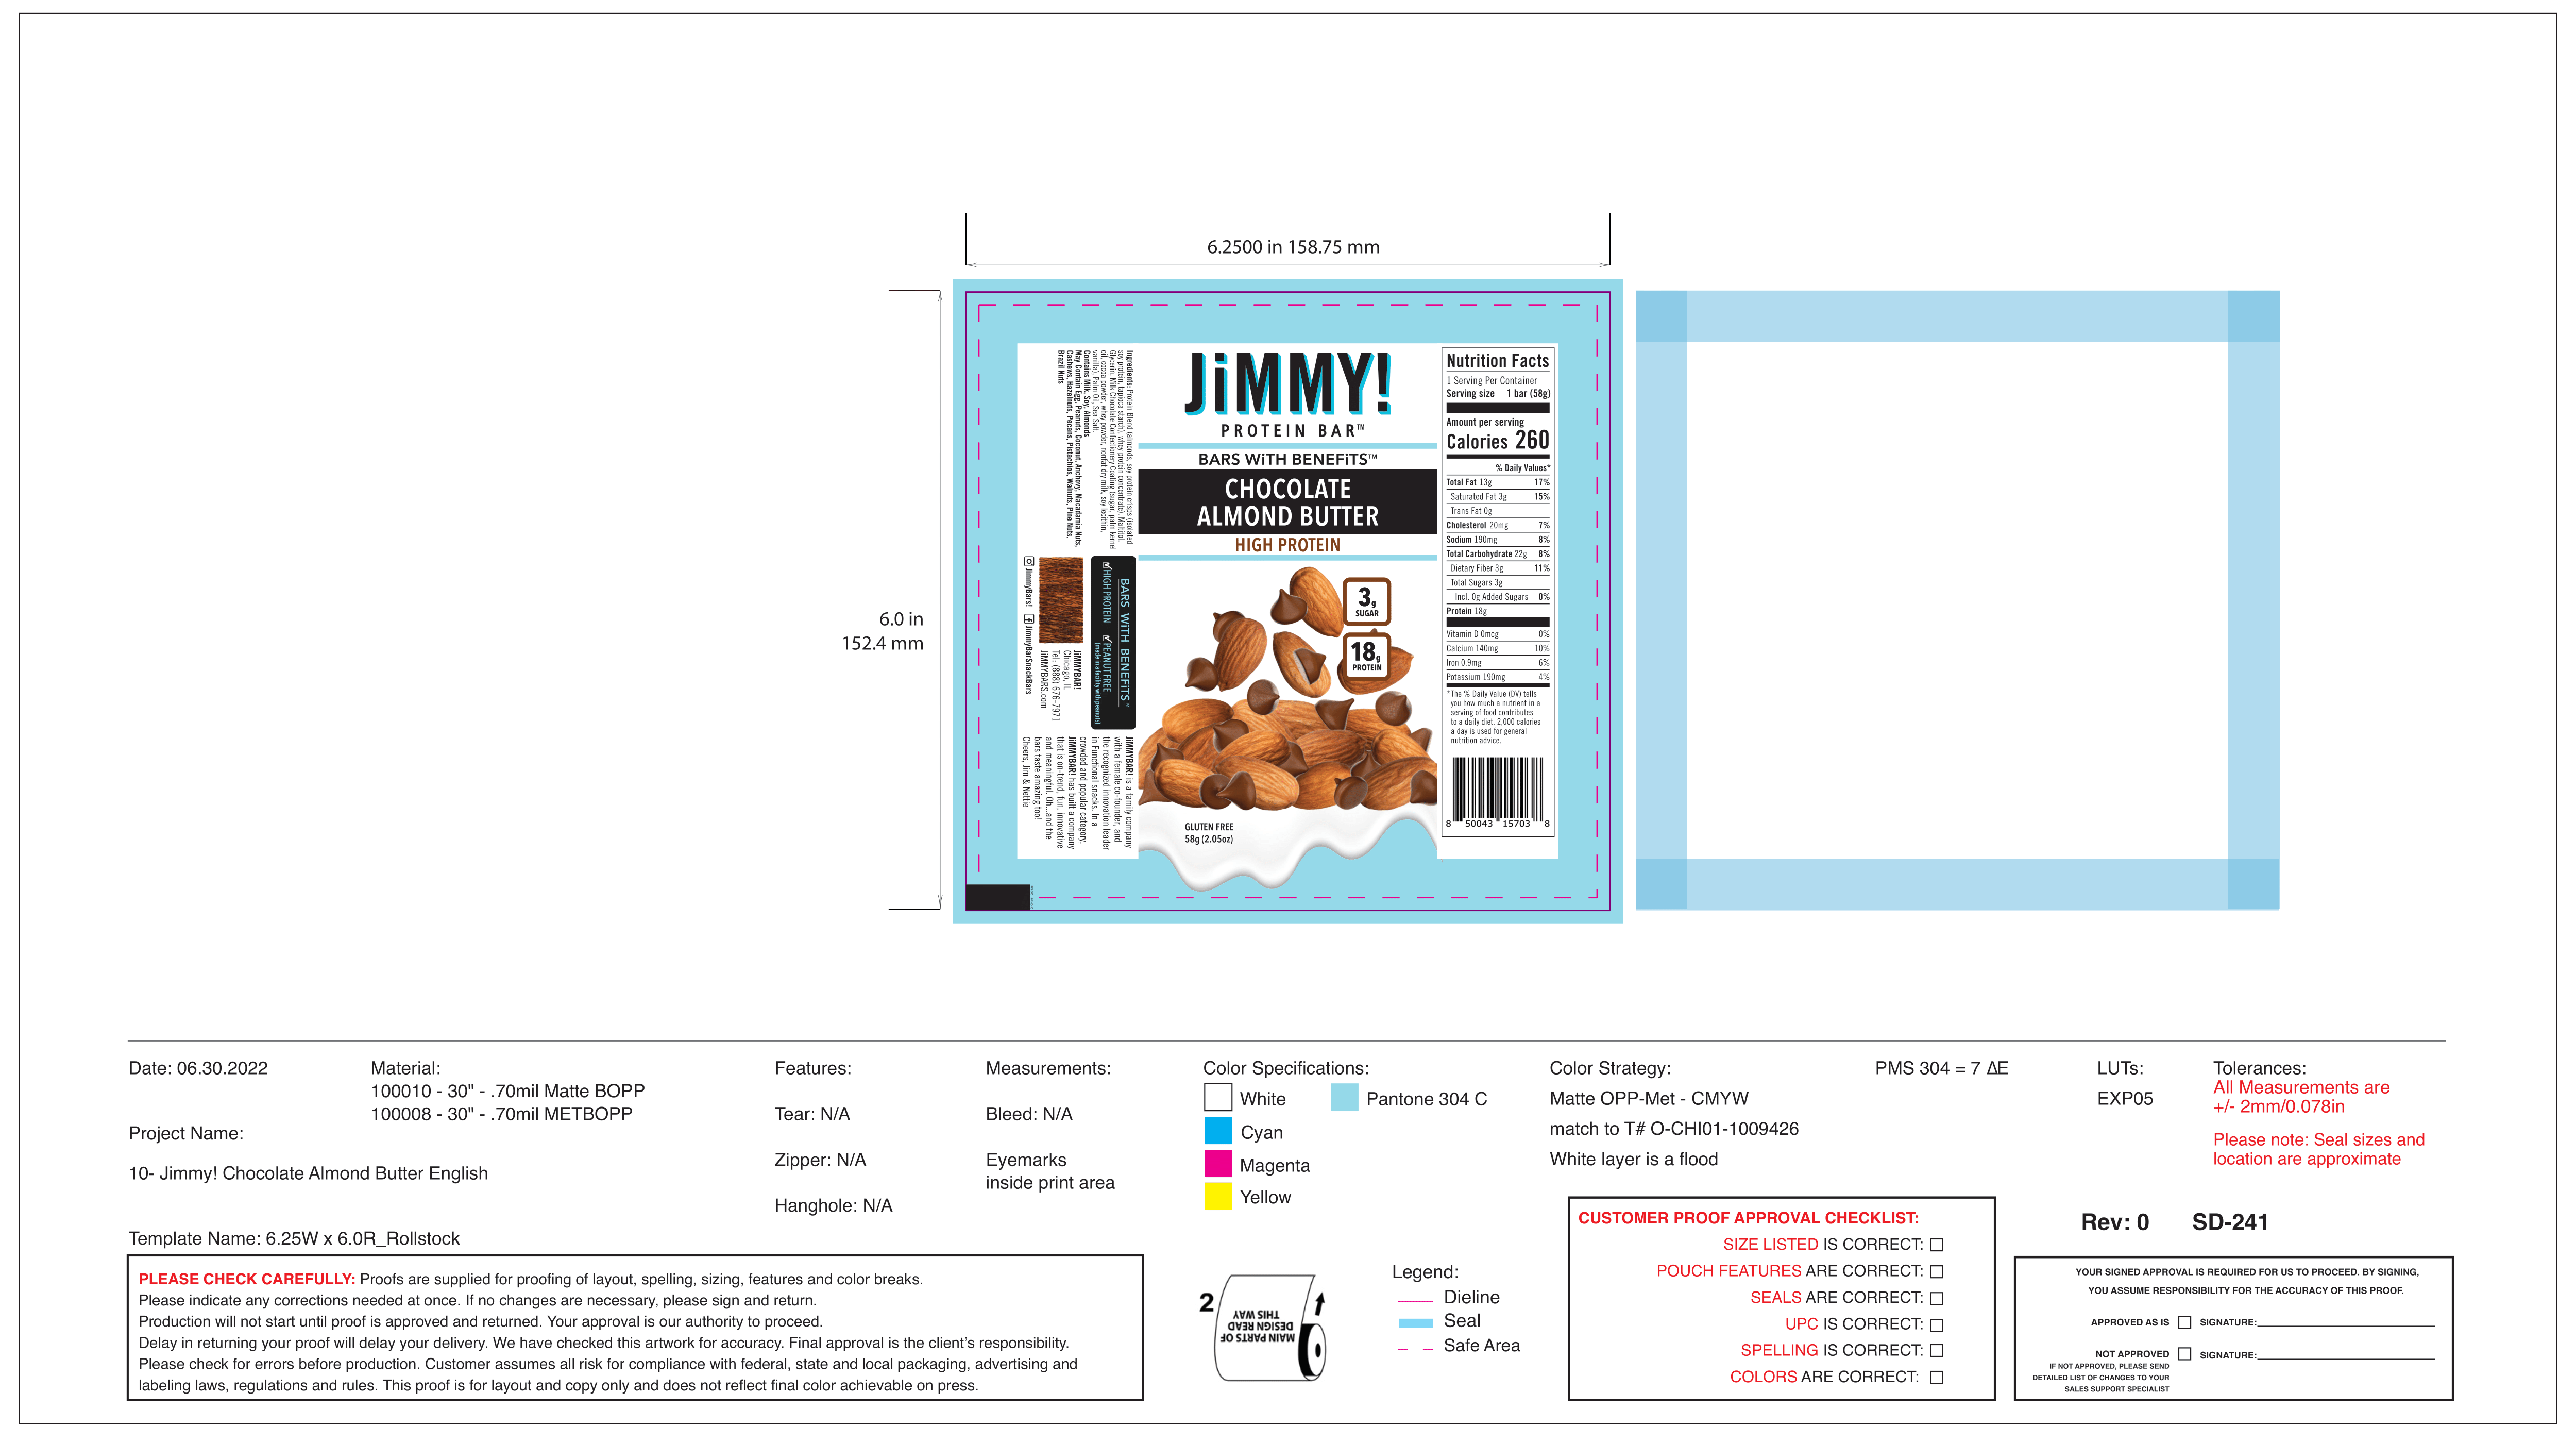 JiMMY! Chocolate Almond Butter 12 innerpacks per case 2.1 oz Product Label